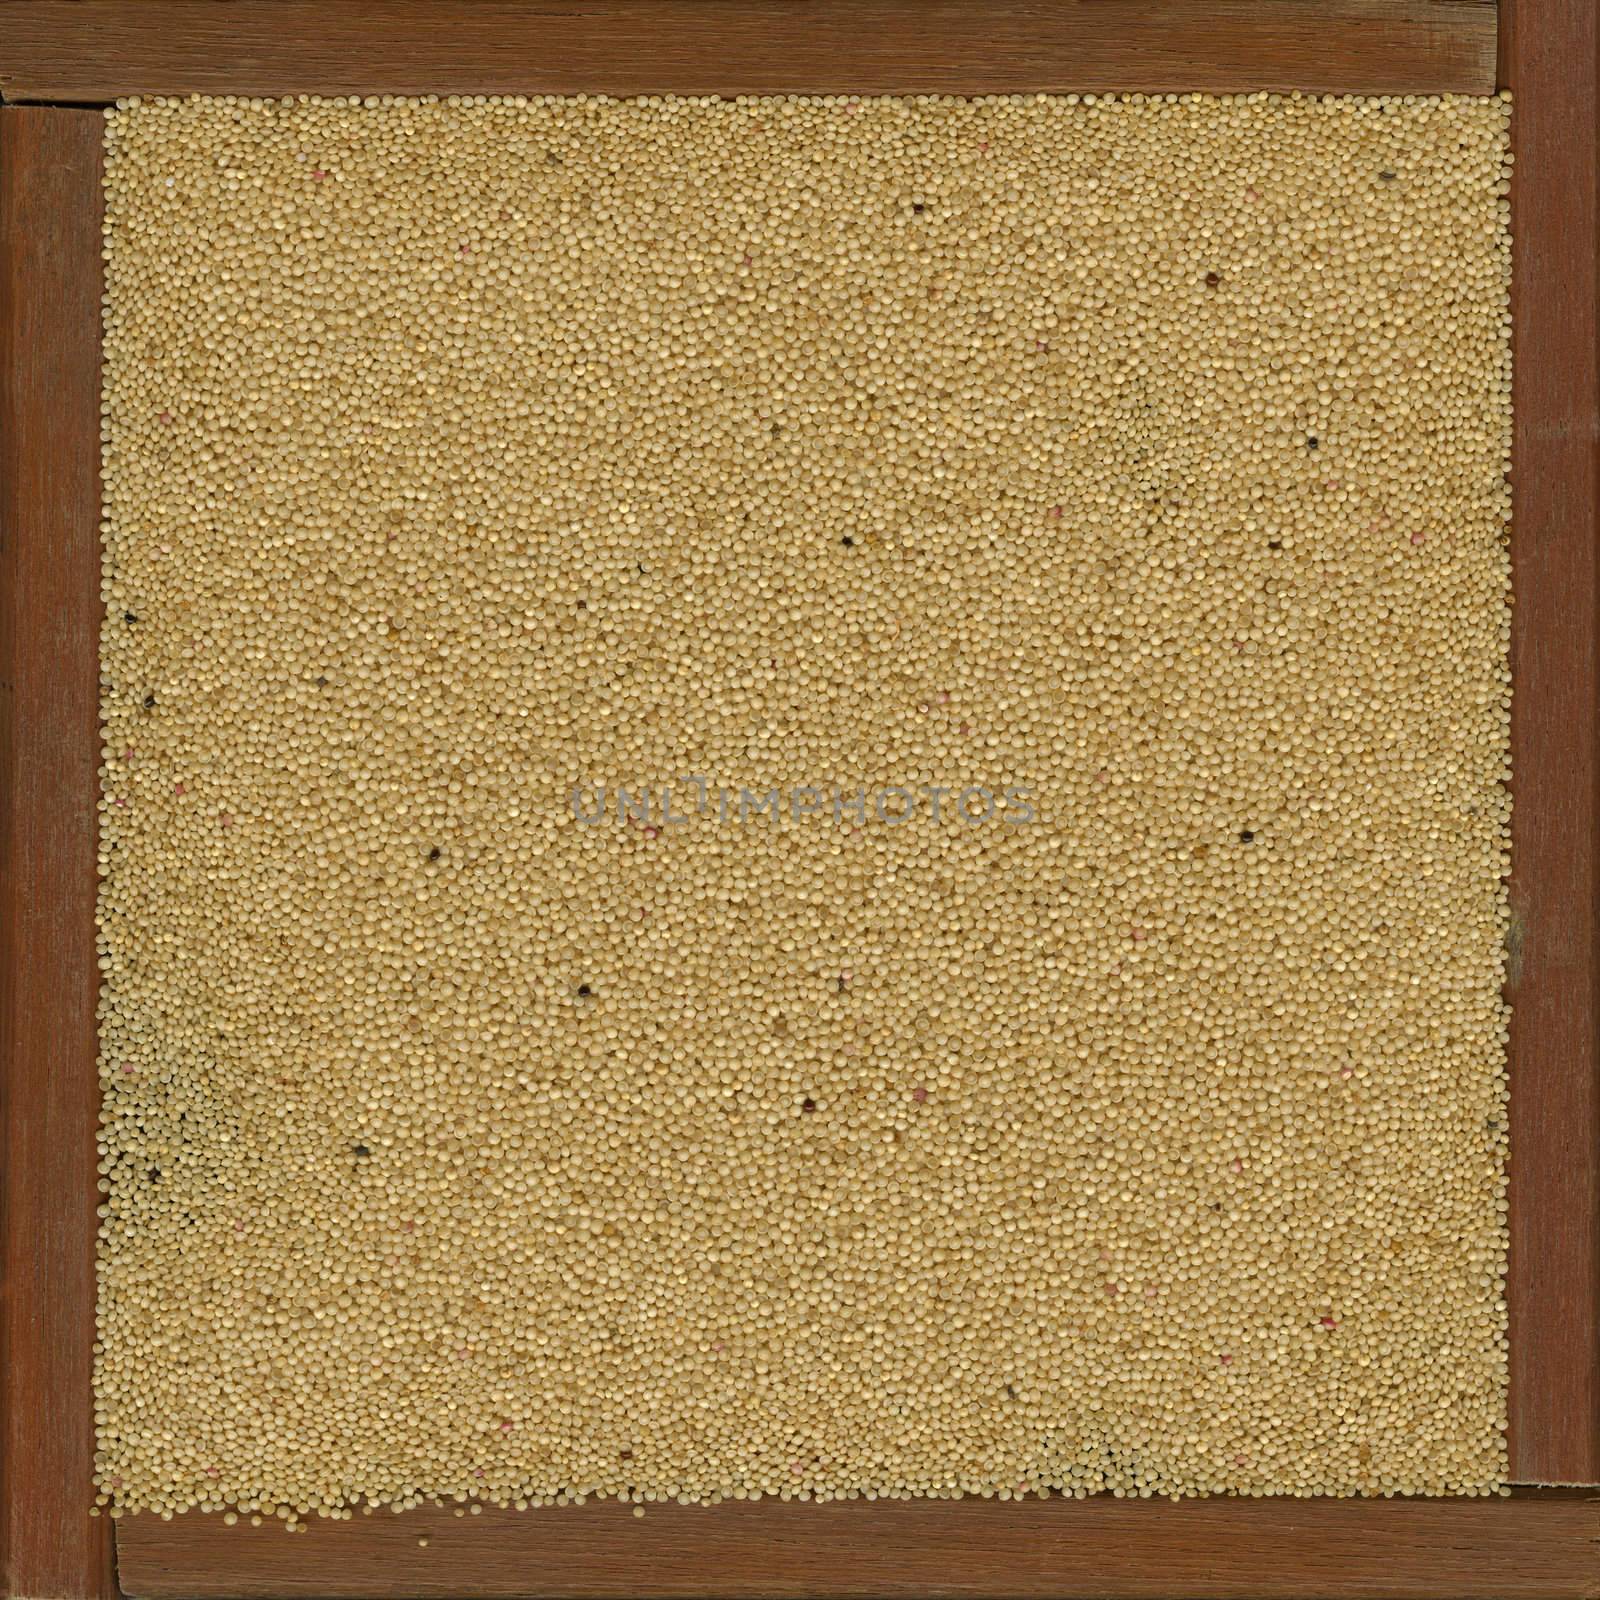 amaranth grain in a rustic wooden box or frame